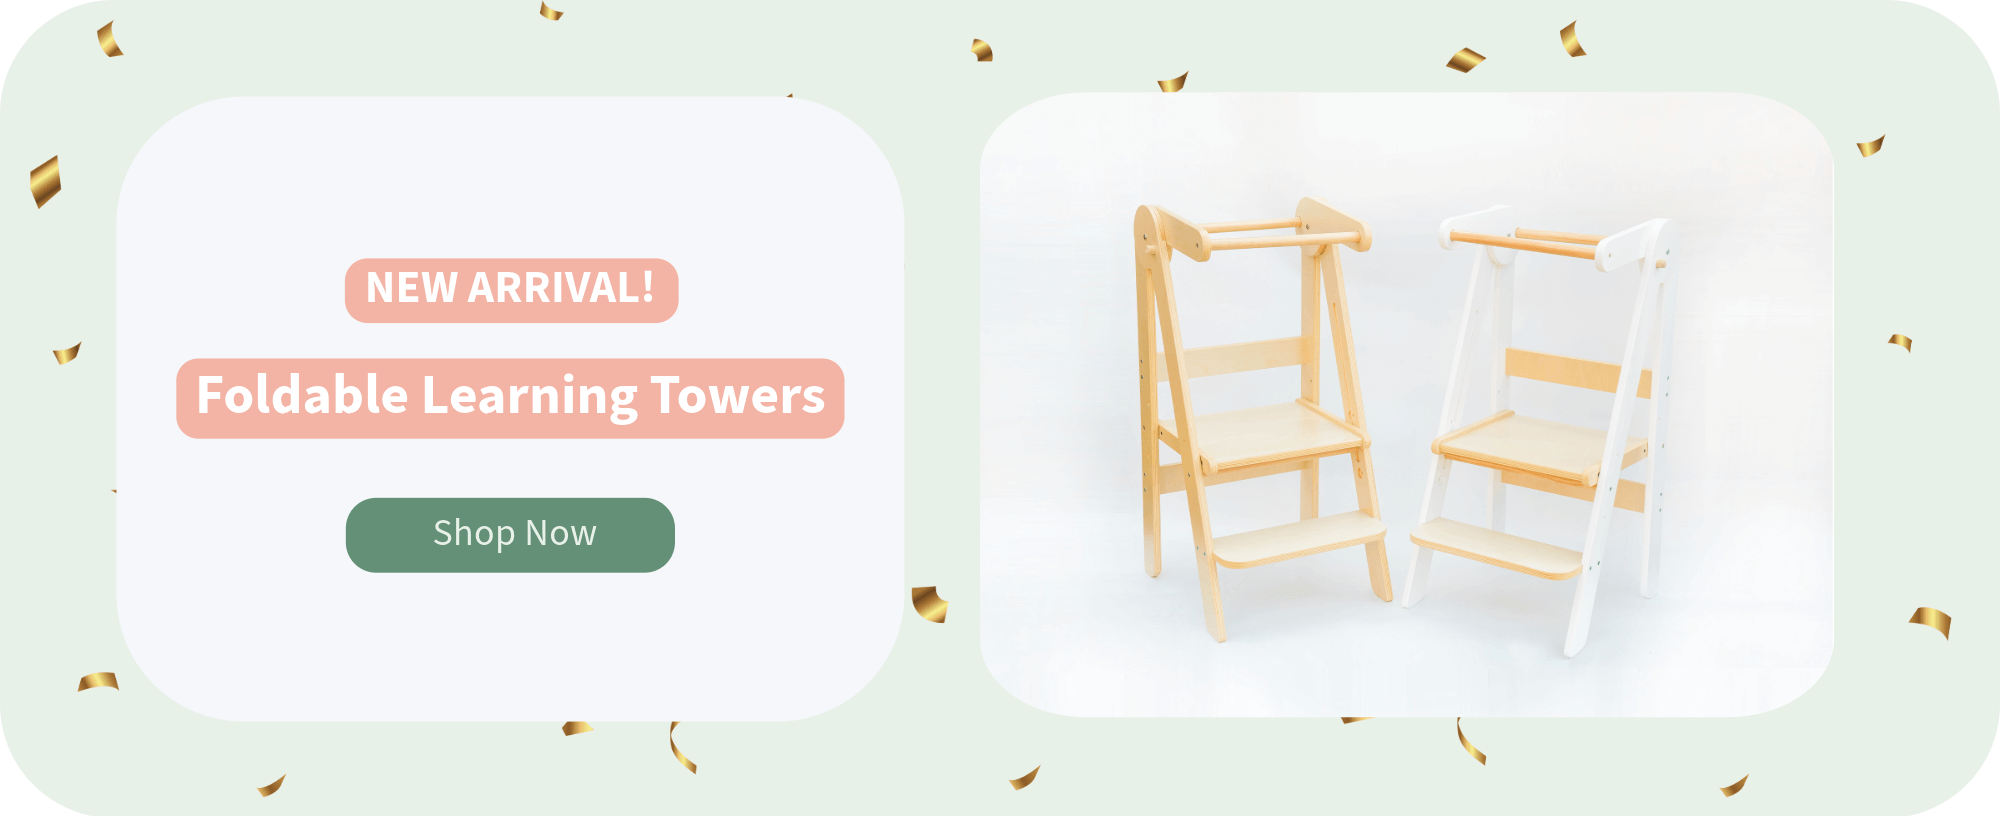 New Arrival Foldable Learning Tower